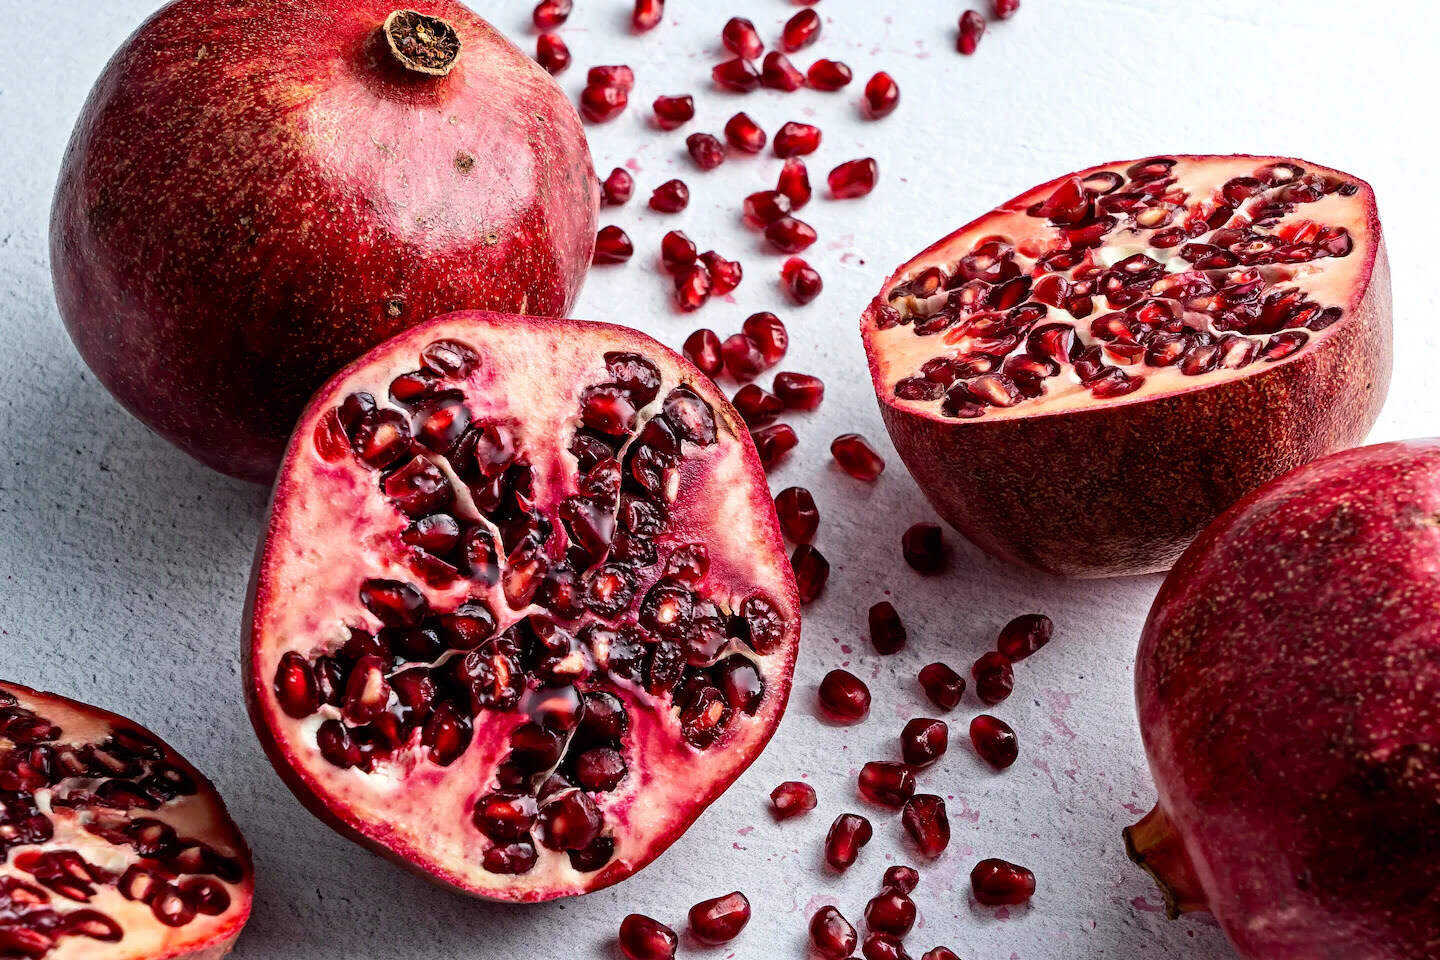 How To Seed Pomegranate